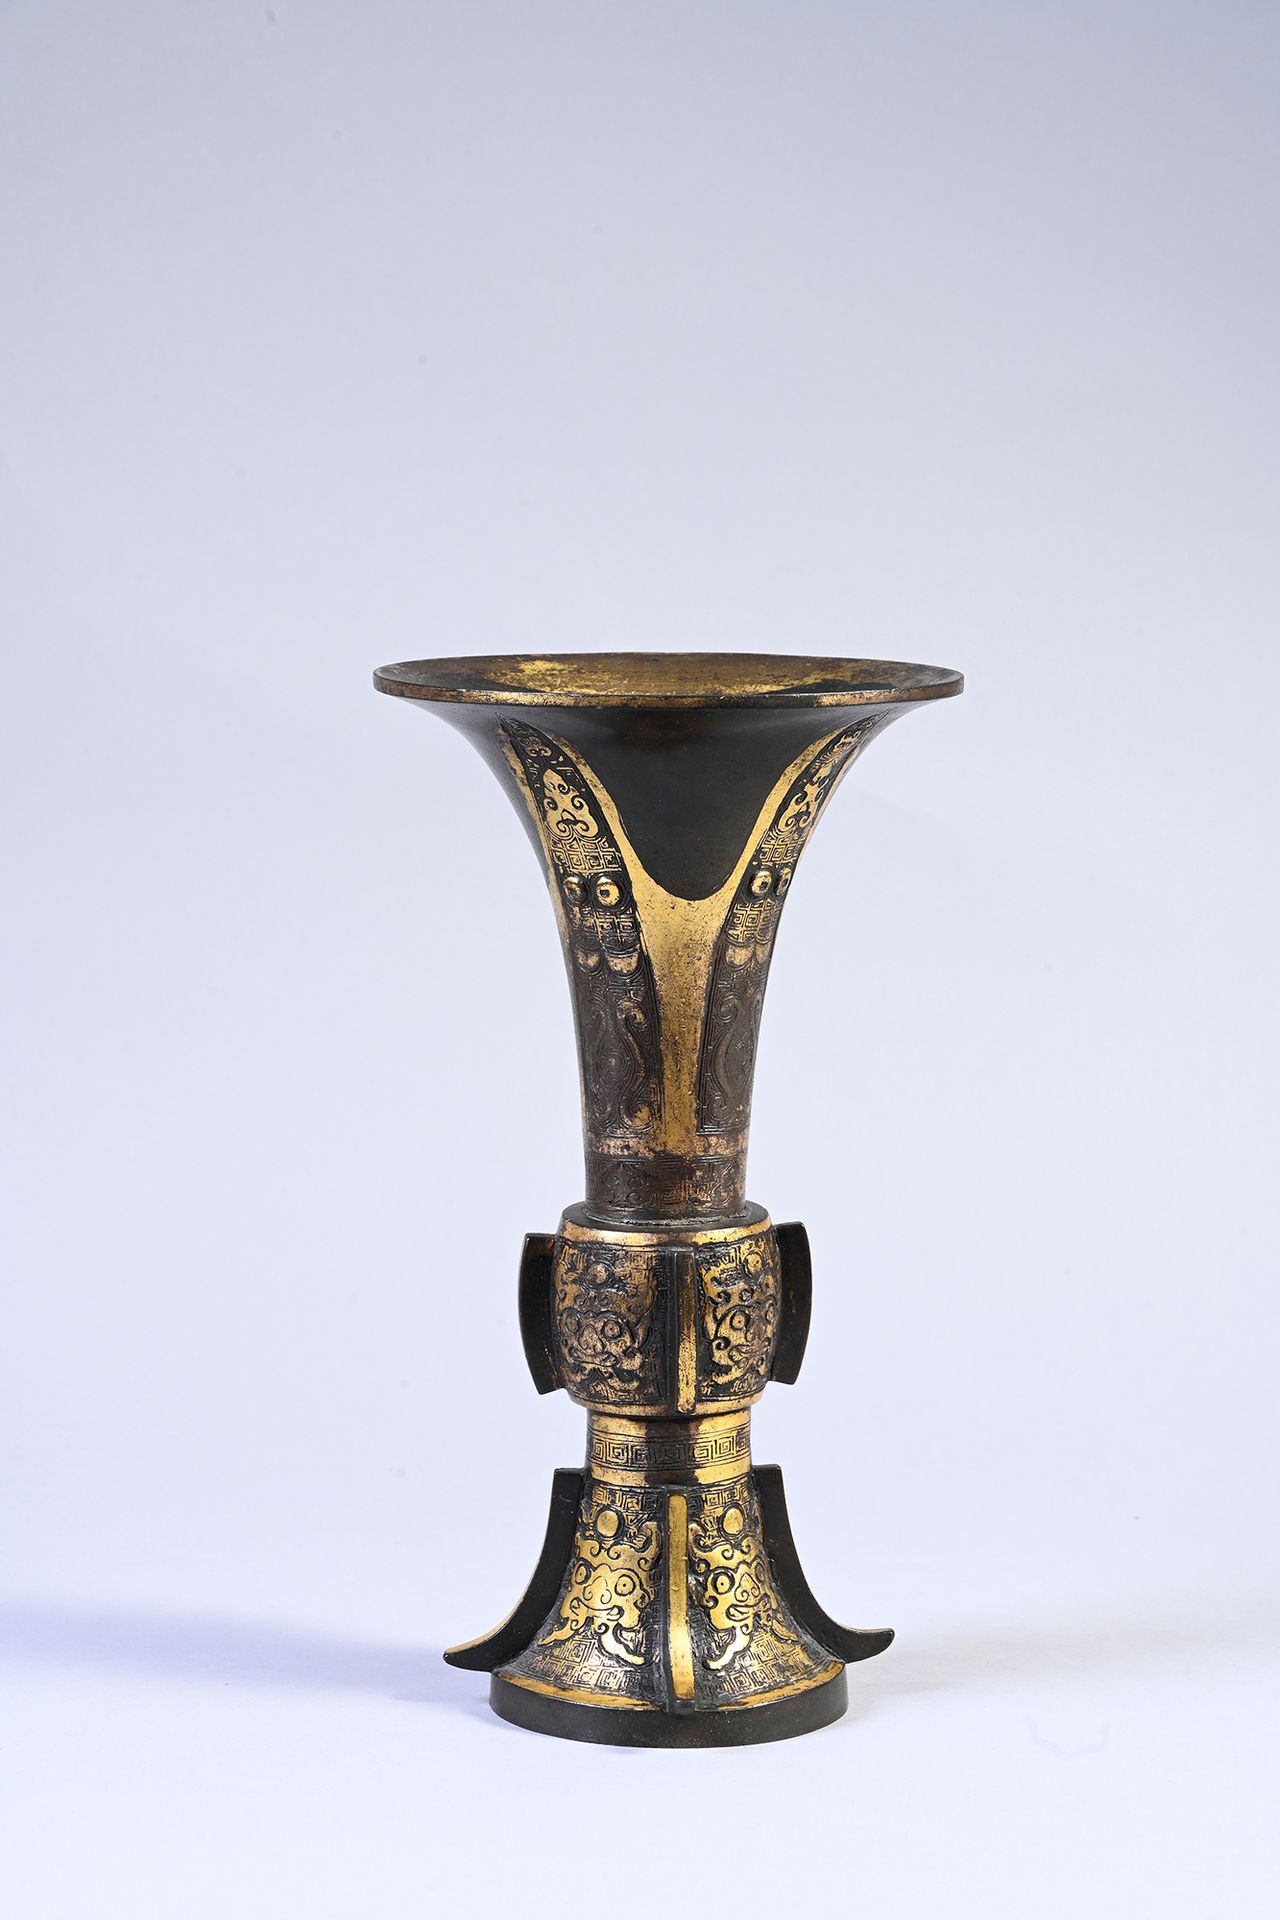 CHINE, XVIIe siècle Vase in partially gilded bronze
Based on the archaic "Gu" ta&hellip;